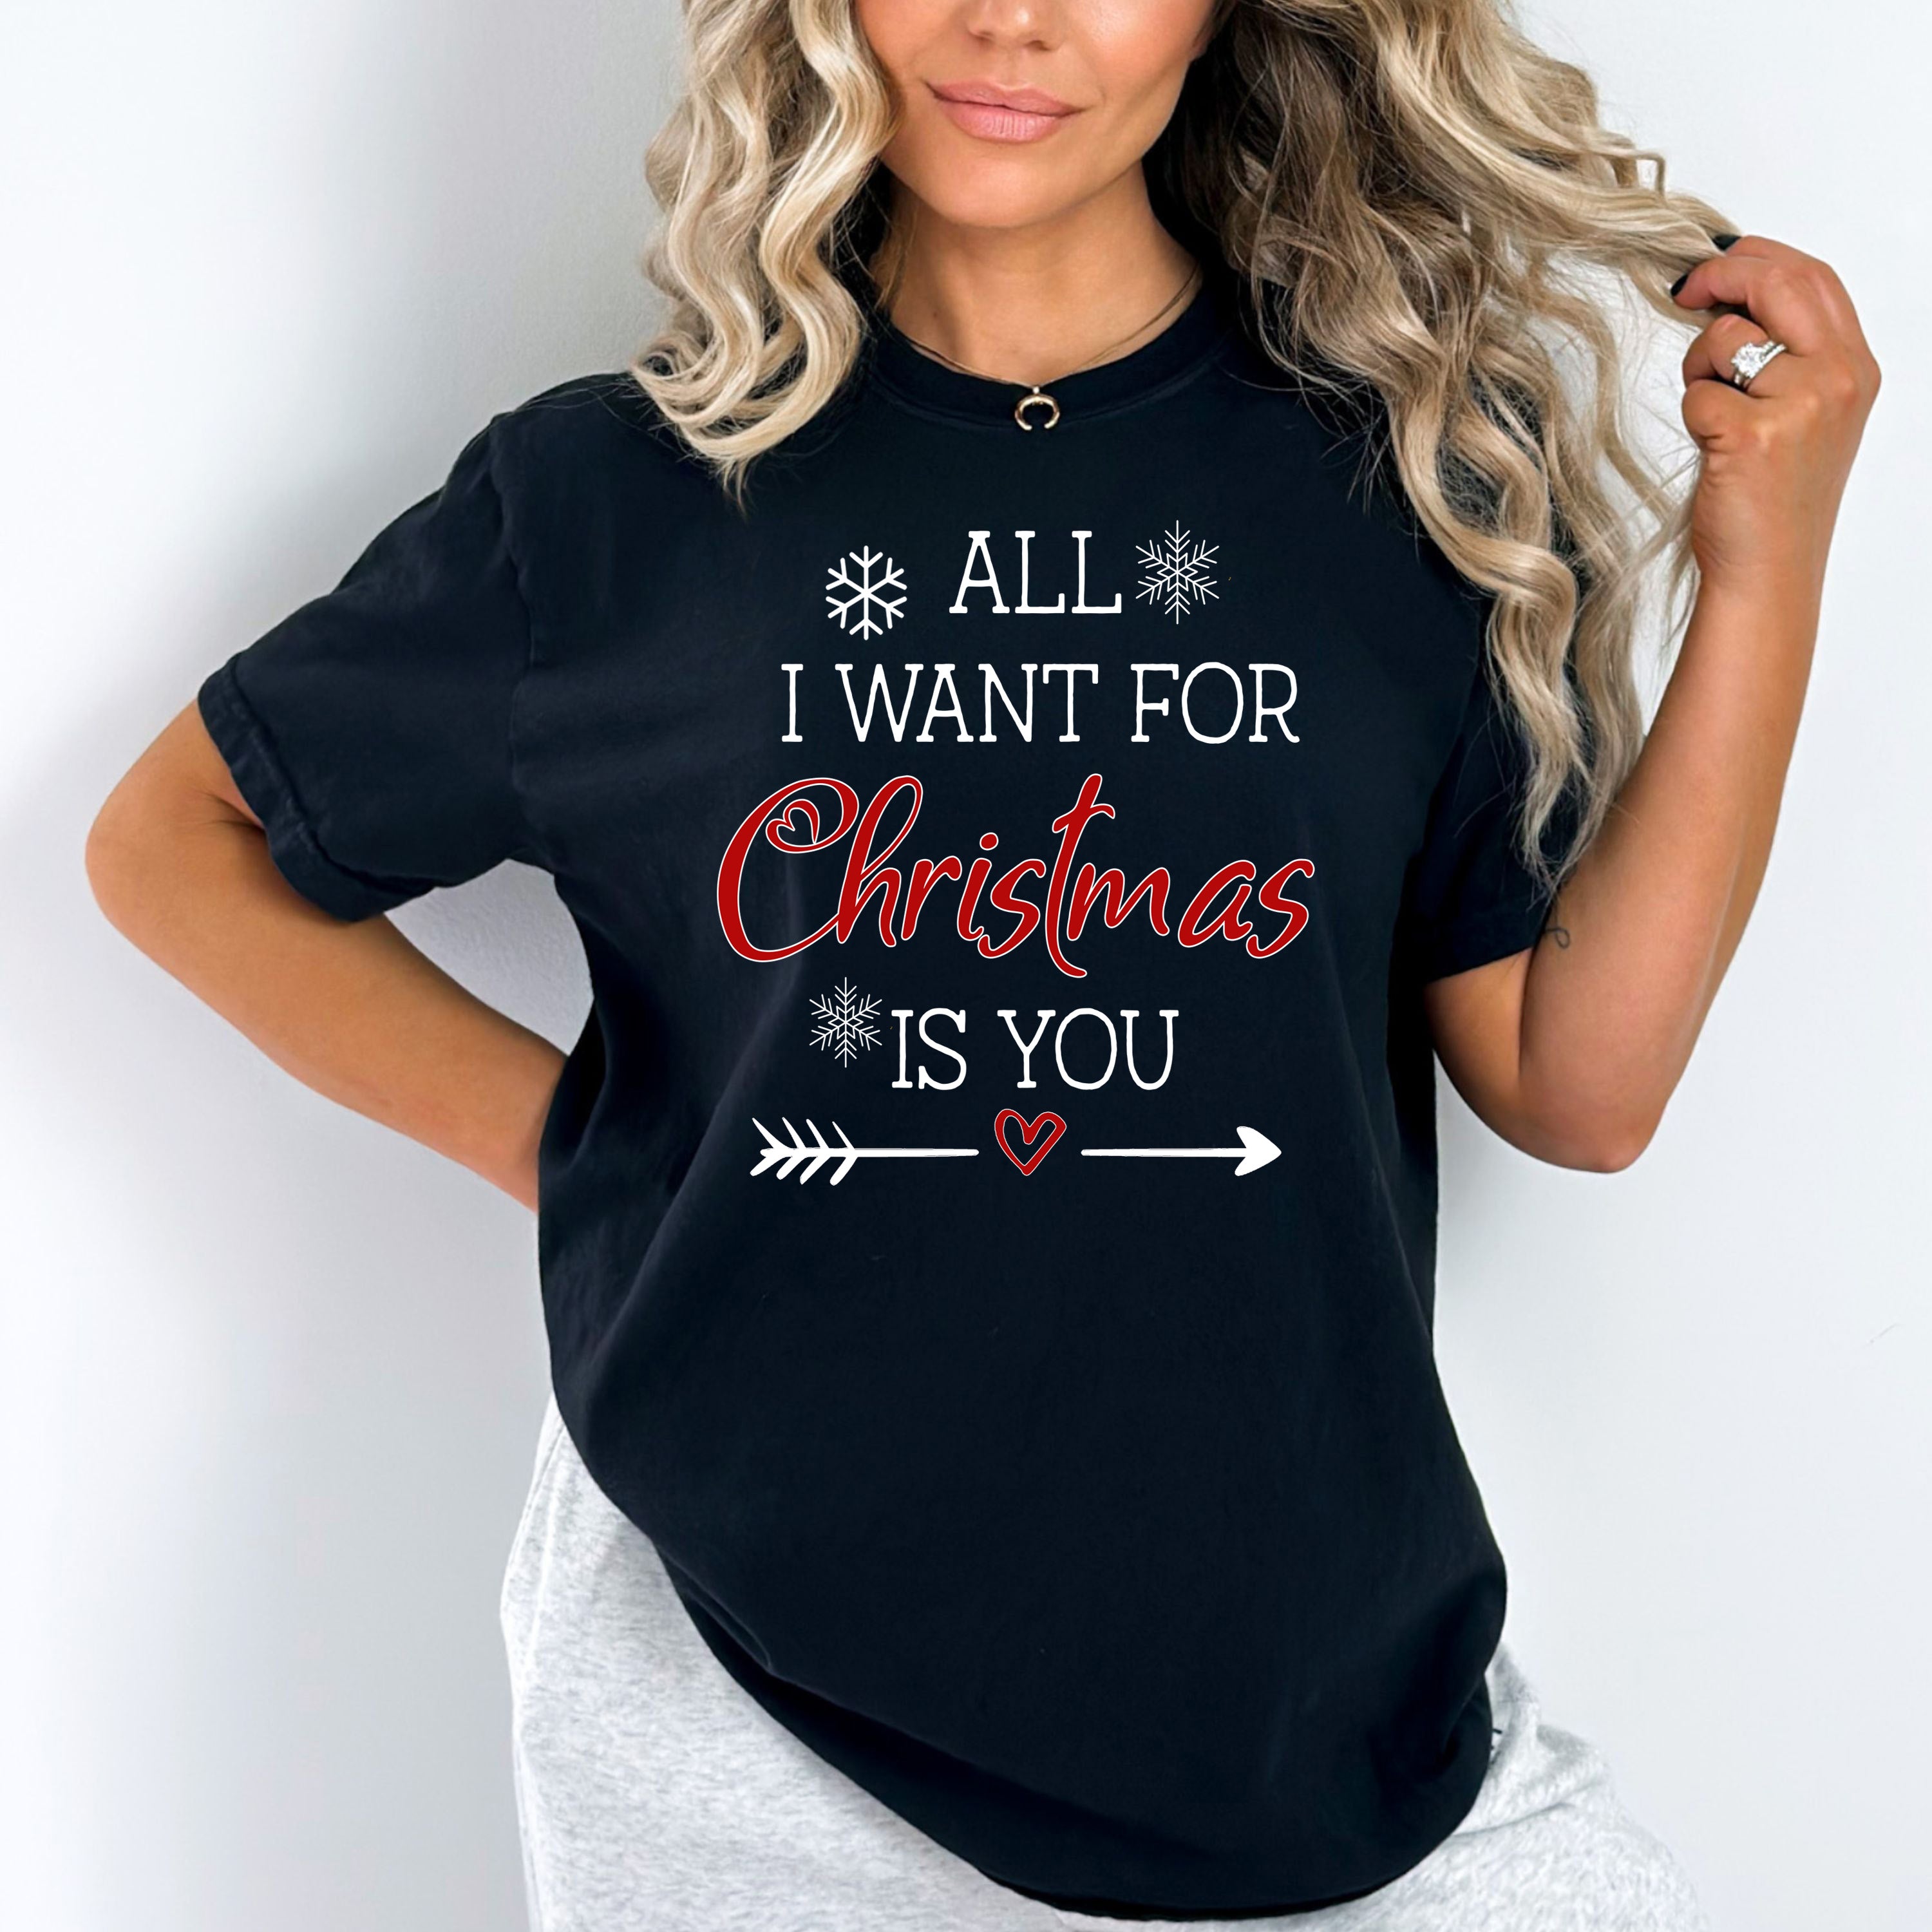 All I want For Christmas Is You - Bella canvas